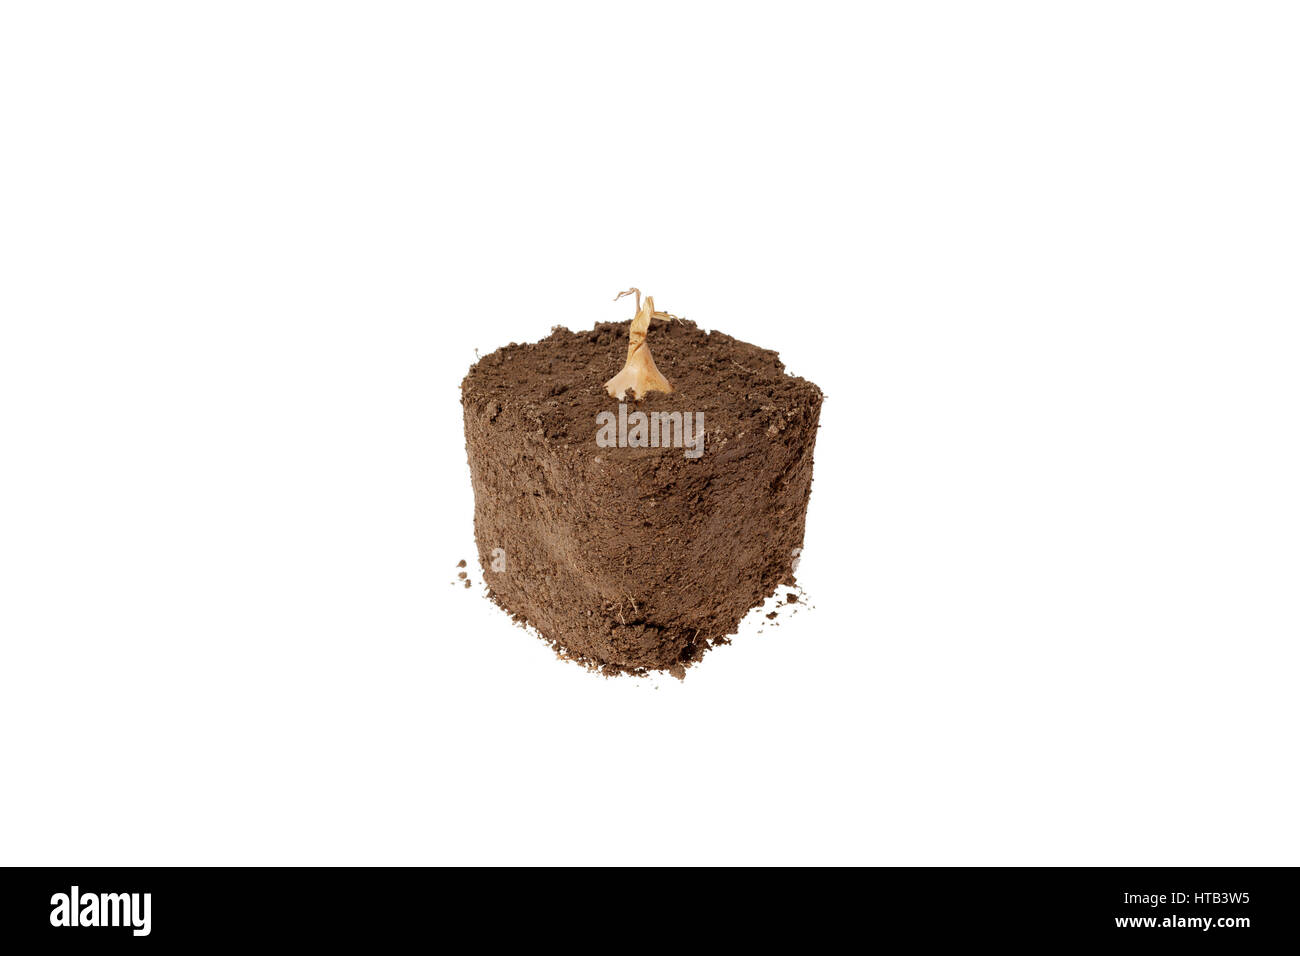 Bulb growing in dirt with a white background. Stock Photo